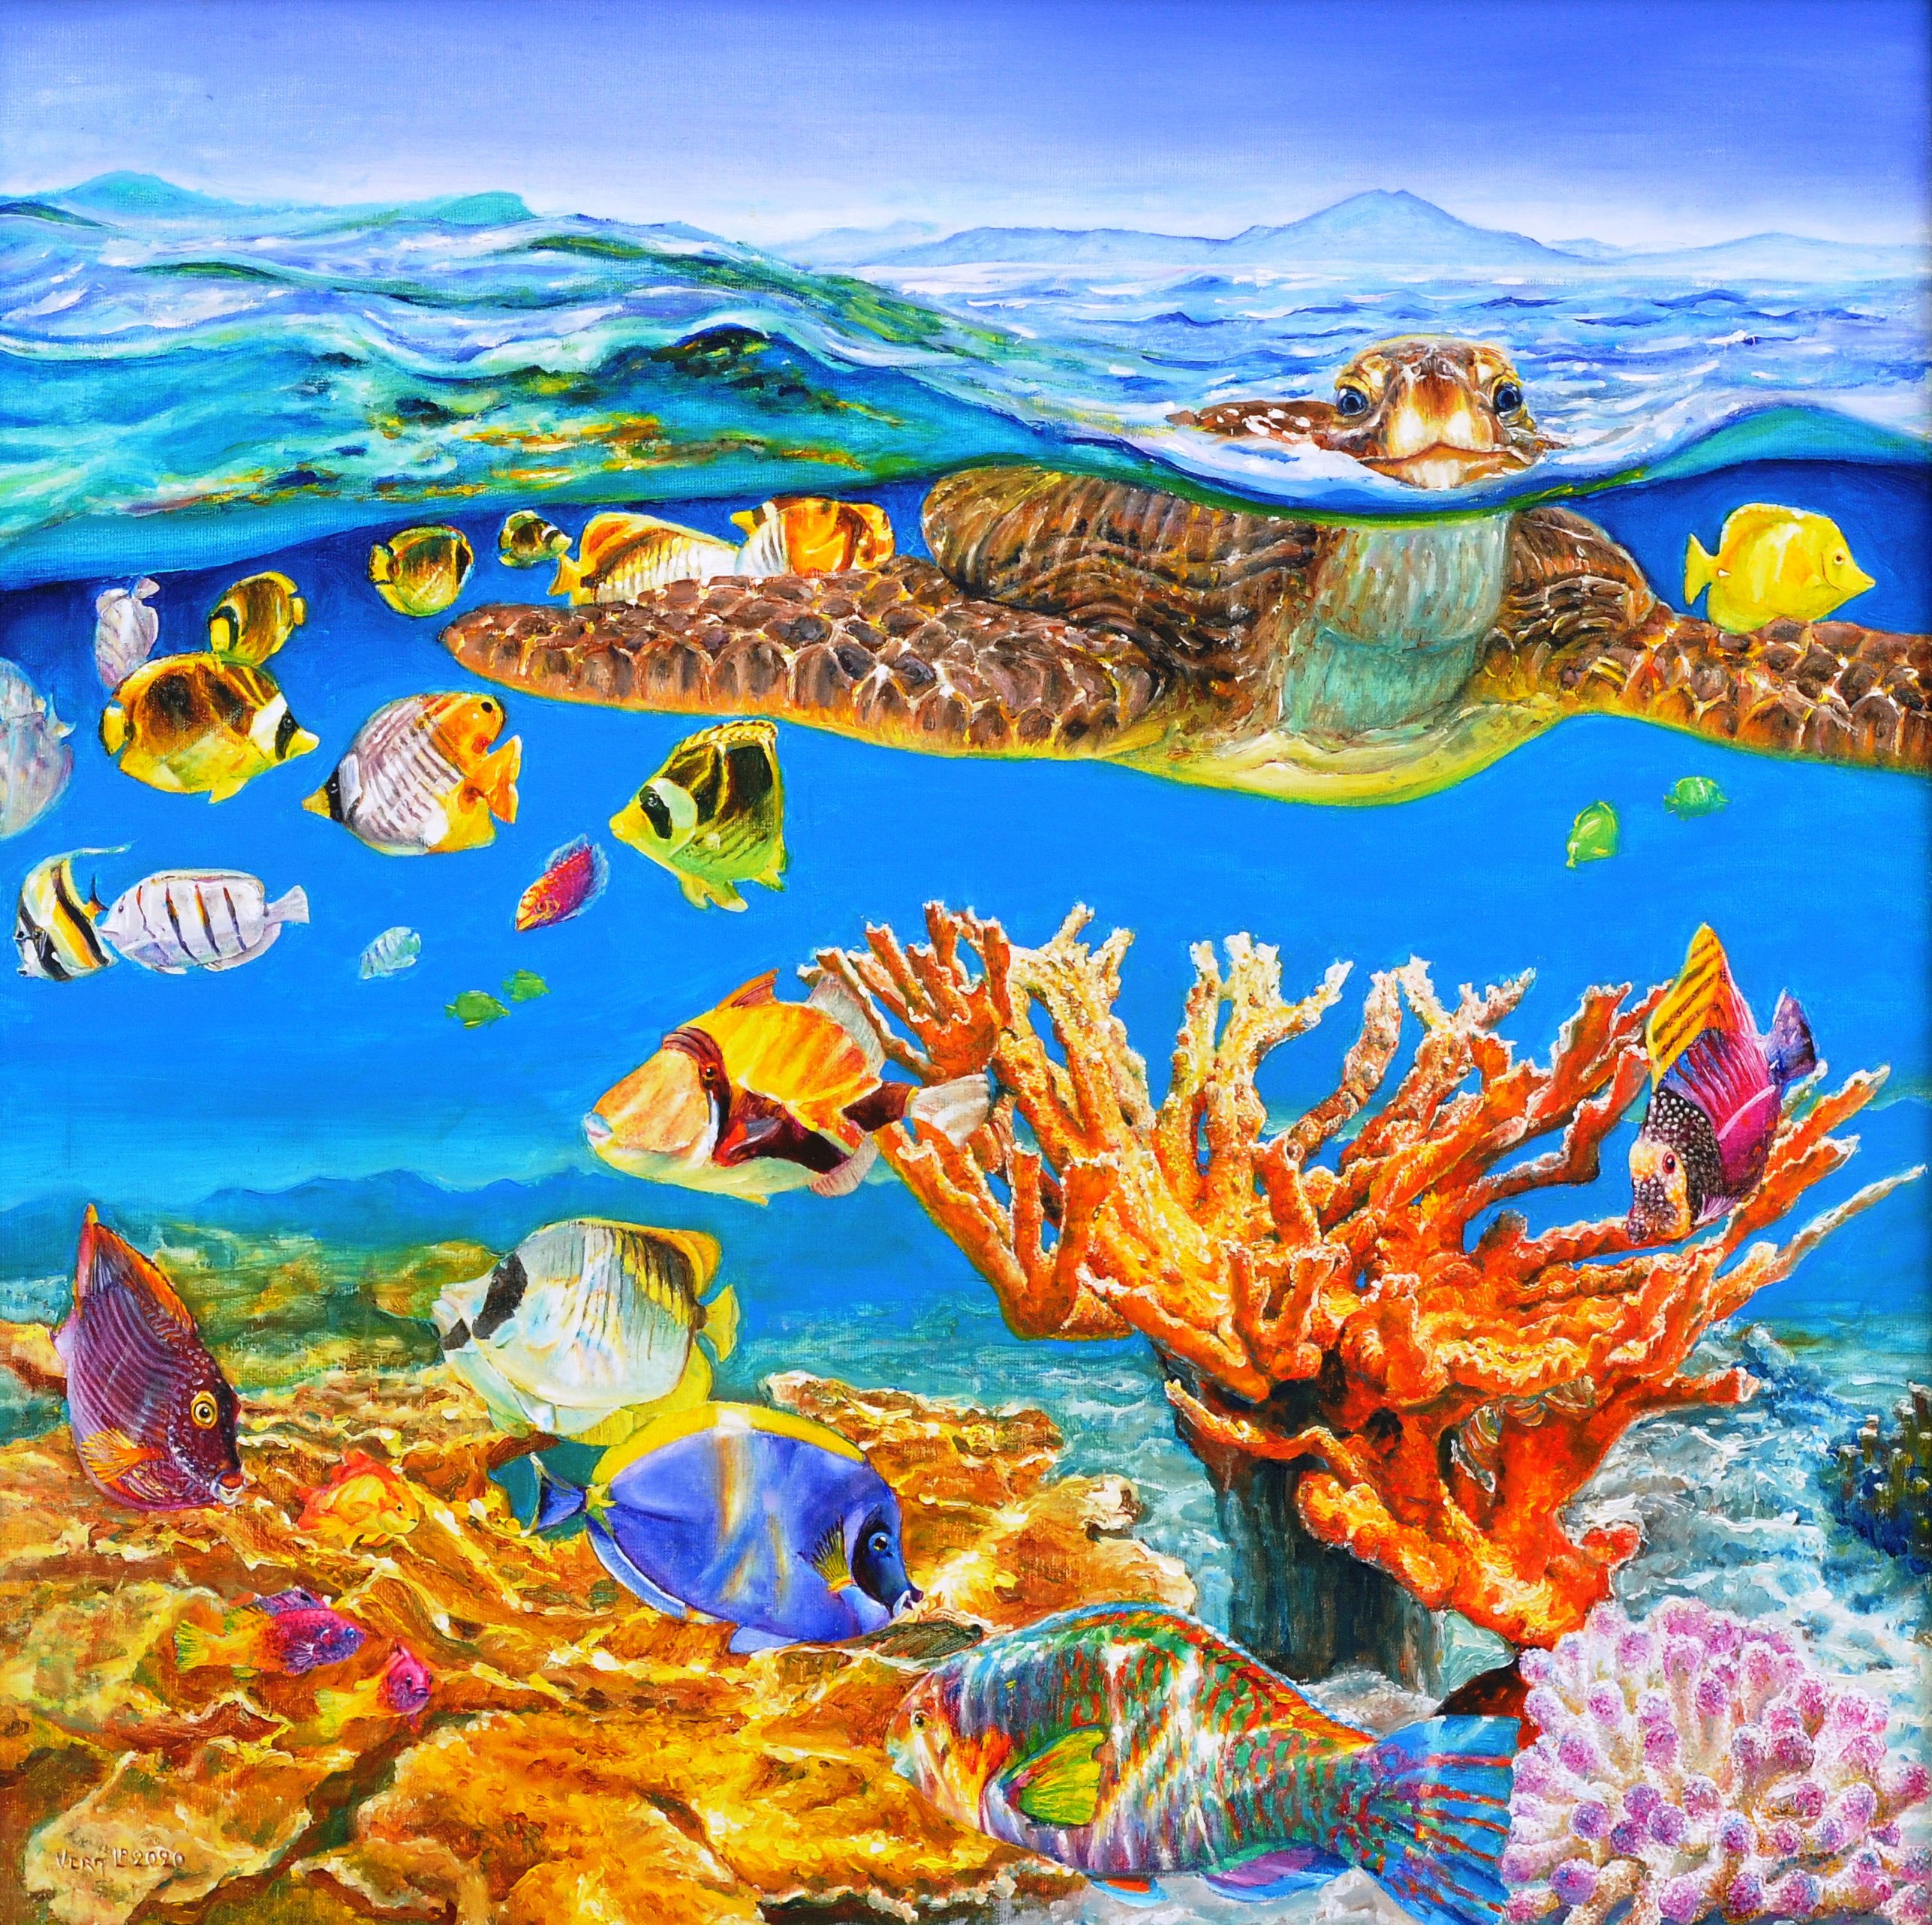 Split image of a coral reef | Oil paint on linen | Year: 2020 | Dimensions: 90x90cm